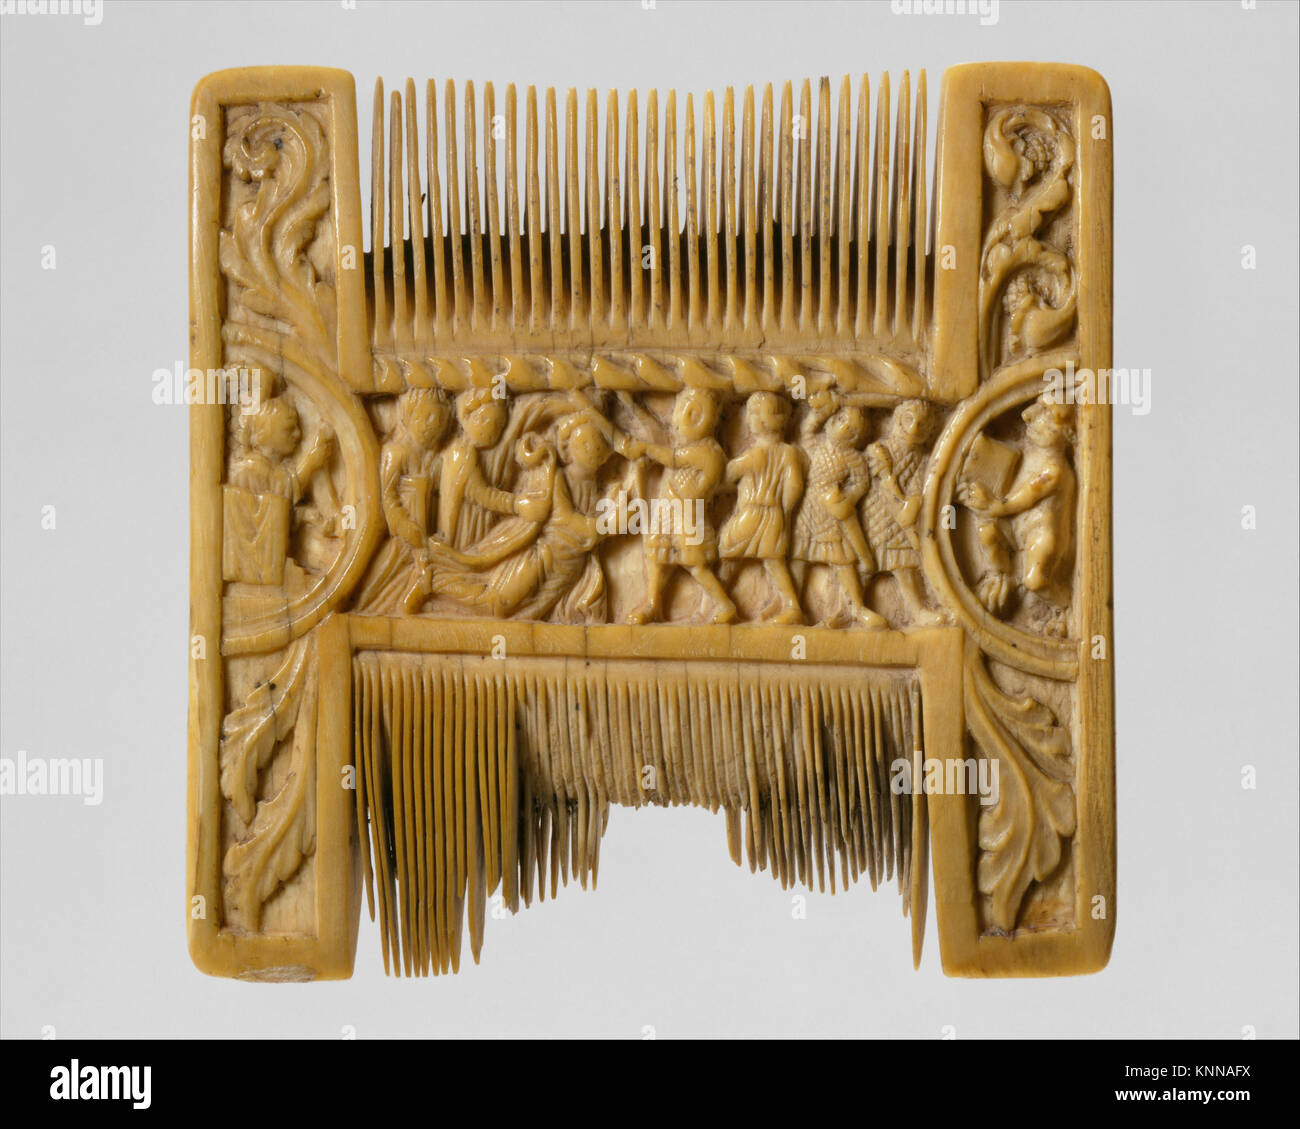 Double-Sided Ivory Liturgical Comb with Scenes of Henry II and Thomas Becket MET DT5979 466161 British, Double-Sided Ivory Liturgical Comb with Scenes of Henry II and Thomas Becket, ca. 1200?1210, Ivory, Overall: 3 3/8 x 3 3/8 x 1/2 in. (8.6 x 8.6 x 1.2 cm). The Metropolitan Museum of Art, New York. Purchase, Rogers Fund, and Schimmel Foundation Inc., Mrs. Maxime L. Hermanos, Lila Acheson Wallace, Nathaniel Spear Jr., Mrs. Katherine S. Rorimer, William Kelly Simpson, Alastair B. Martin and Anonymous Gifts, 1988 (1988.279) Stock Photo